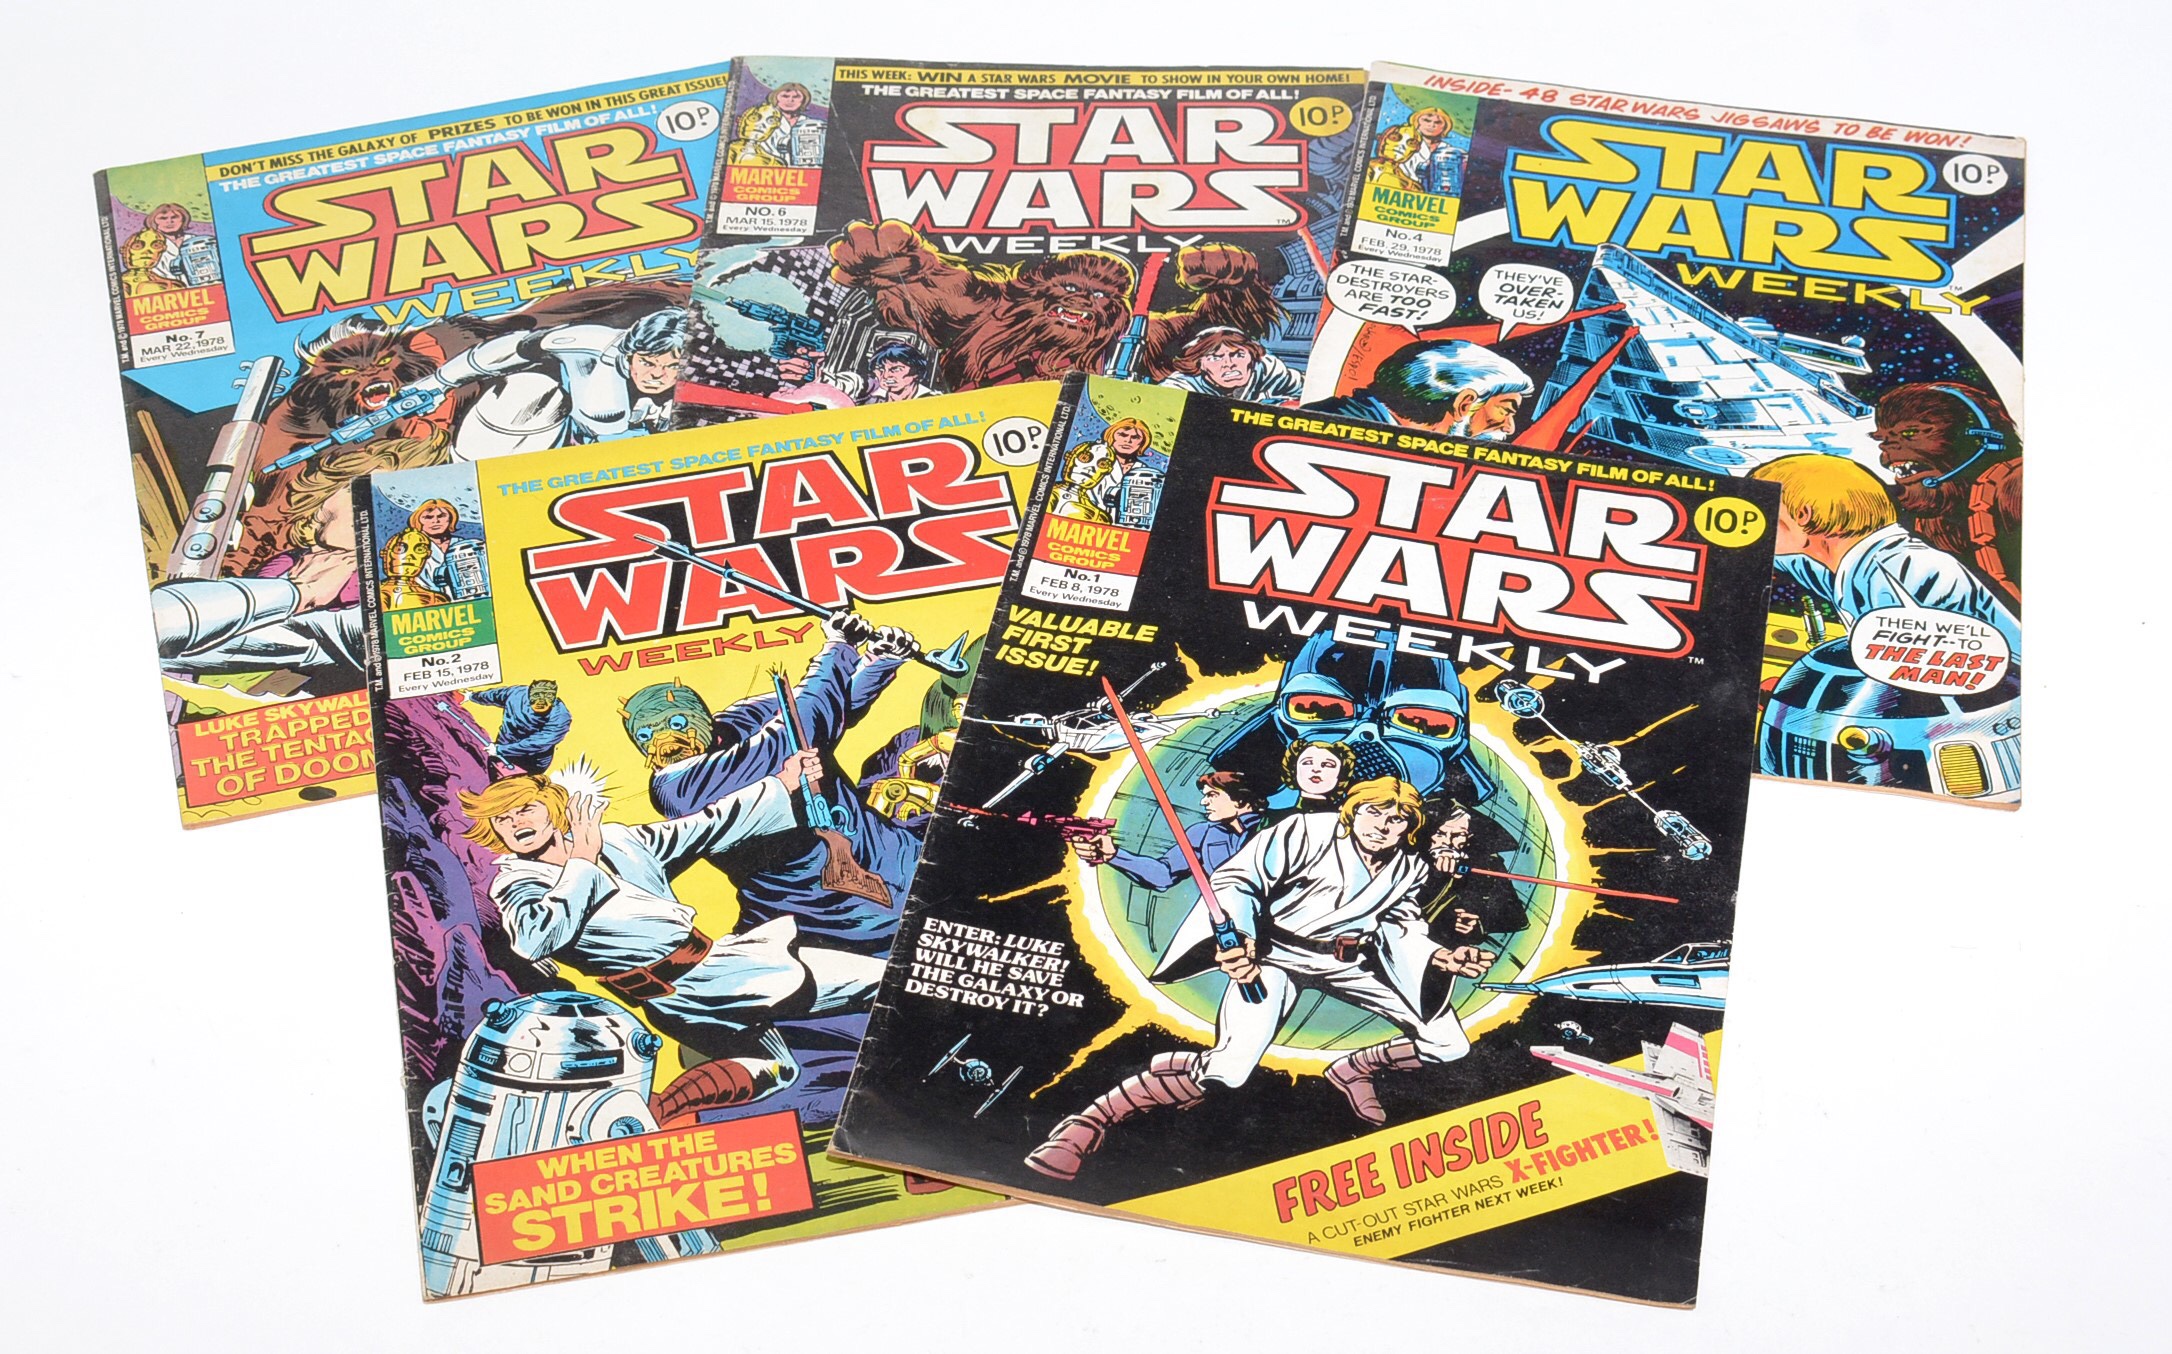 Star Wars Weekly, No's. 1 (February 8th 1978) - 13